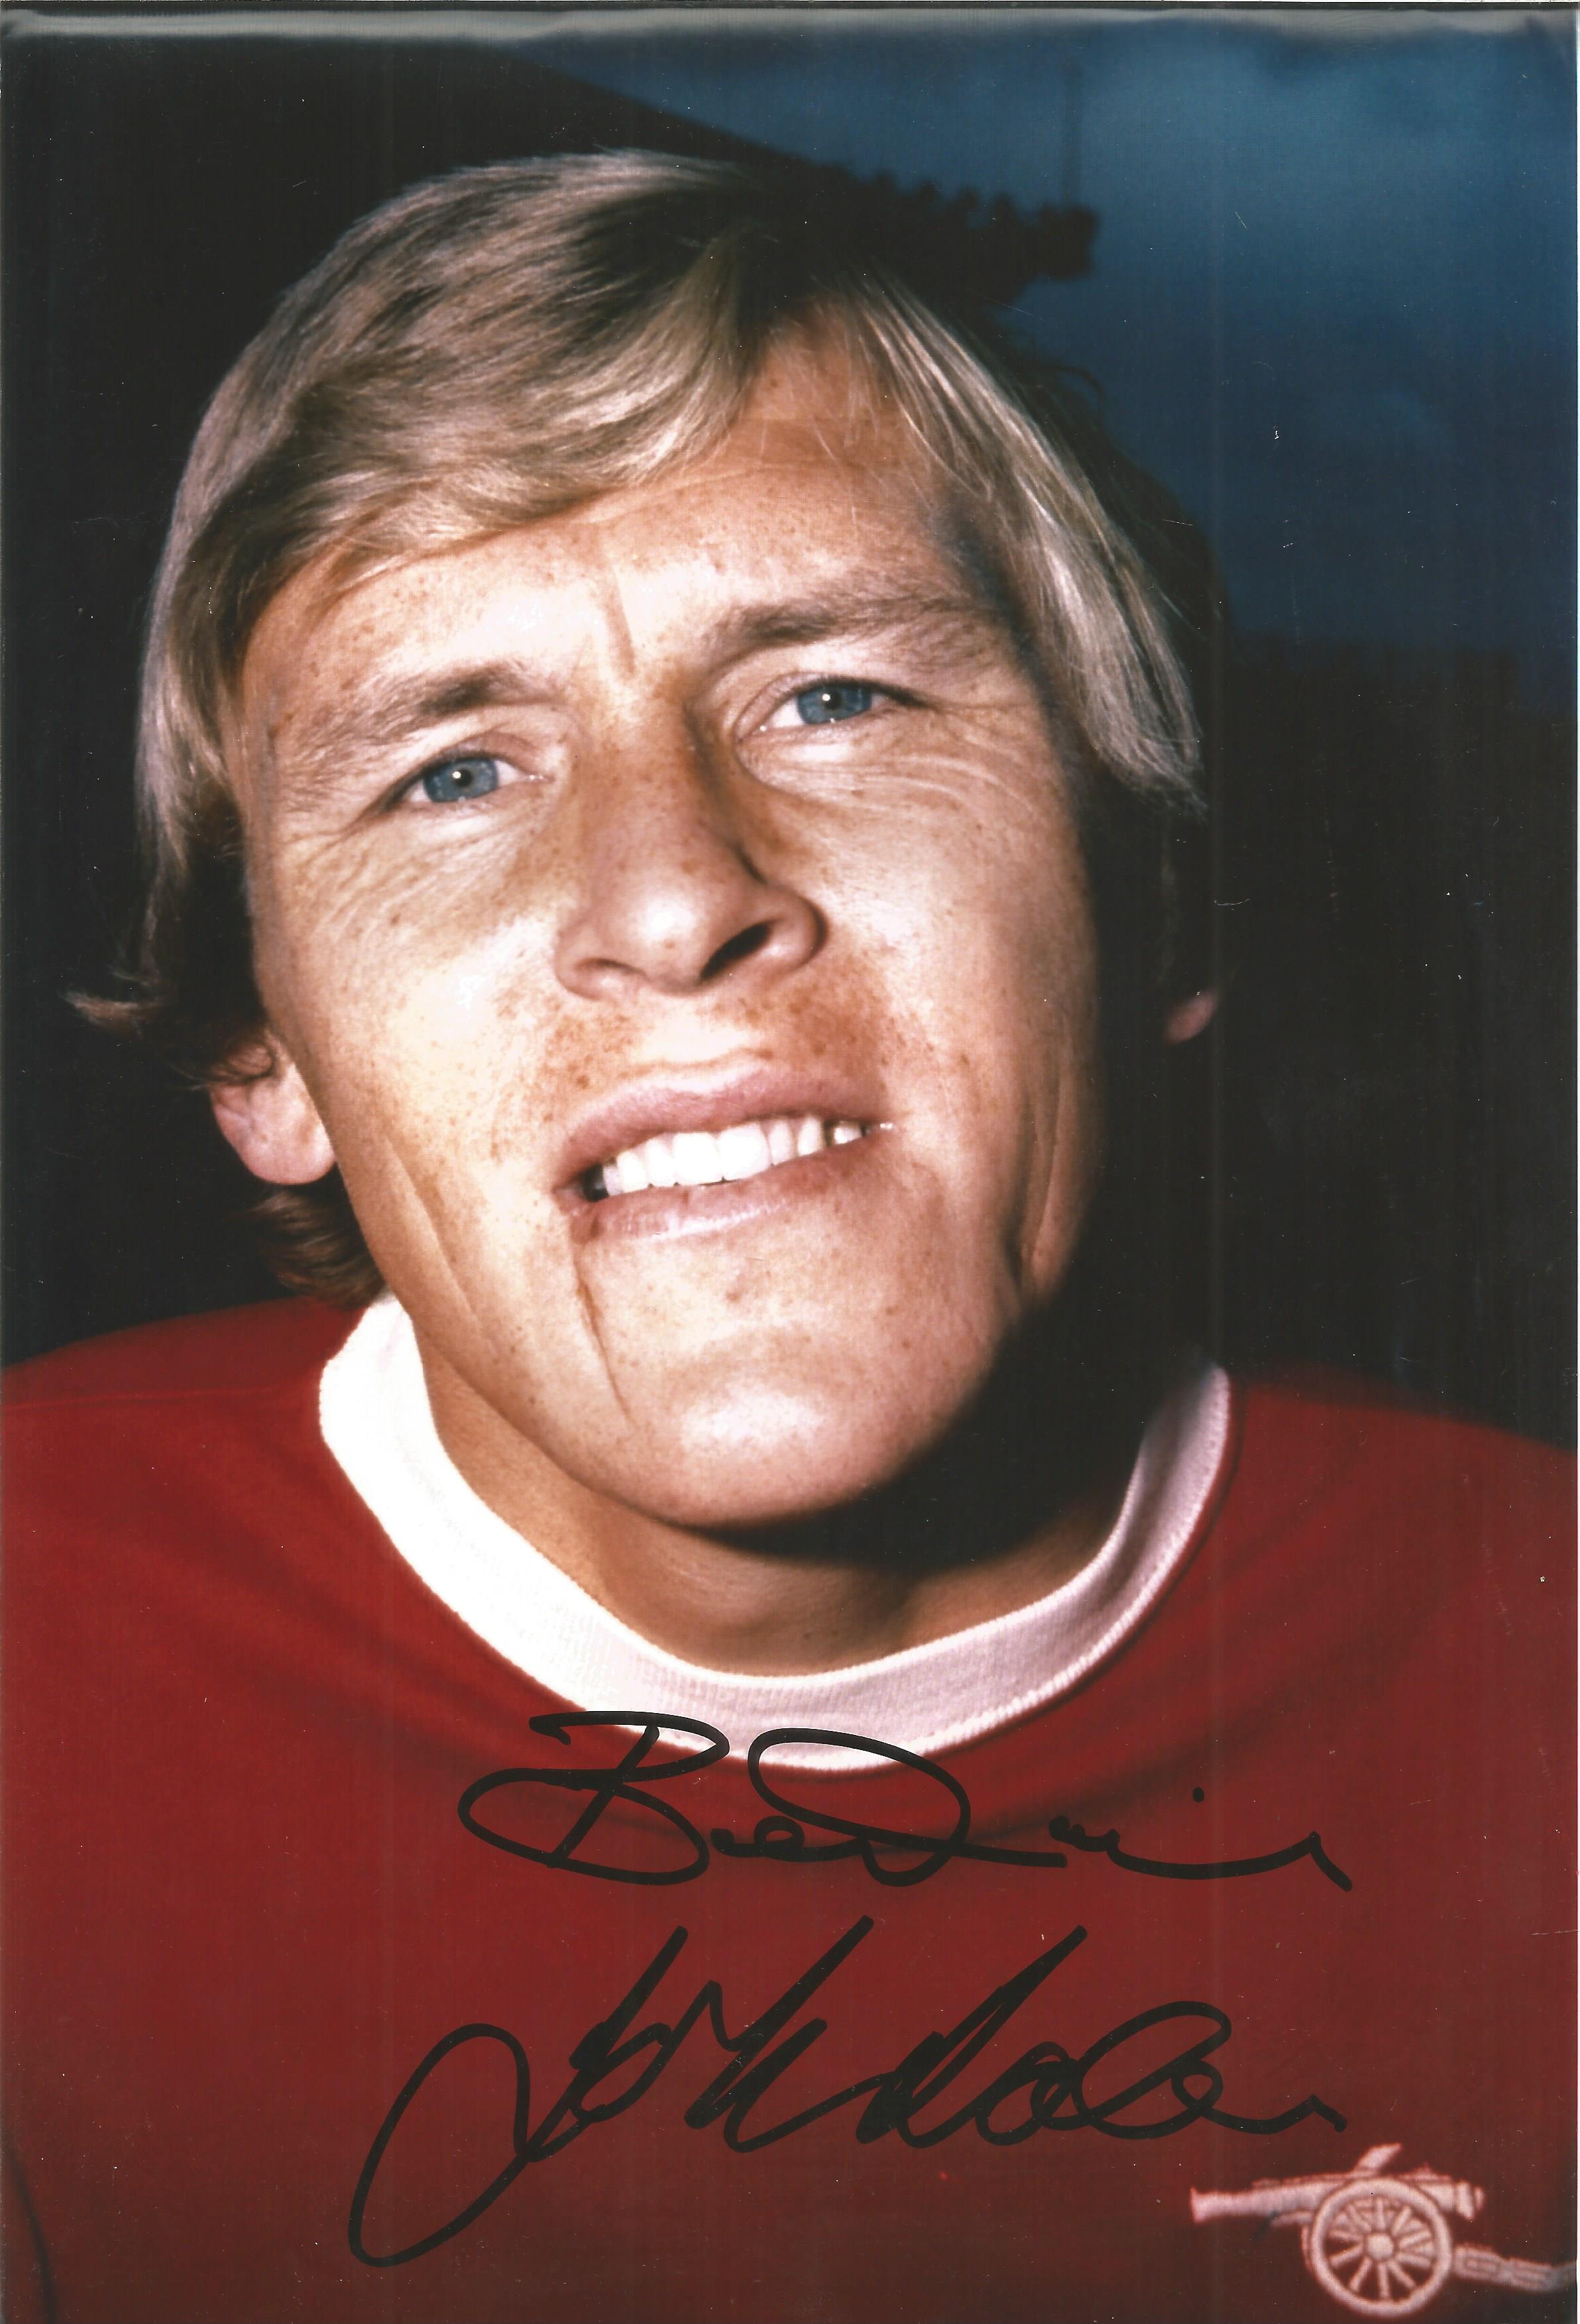 John Roberts Signed 8x12 Arsenal Photo. Good condition. All autographs come with a Certificate of